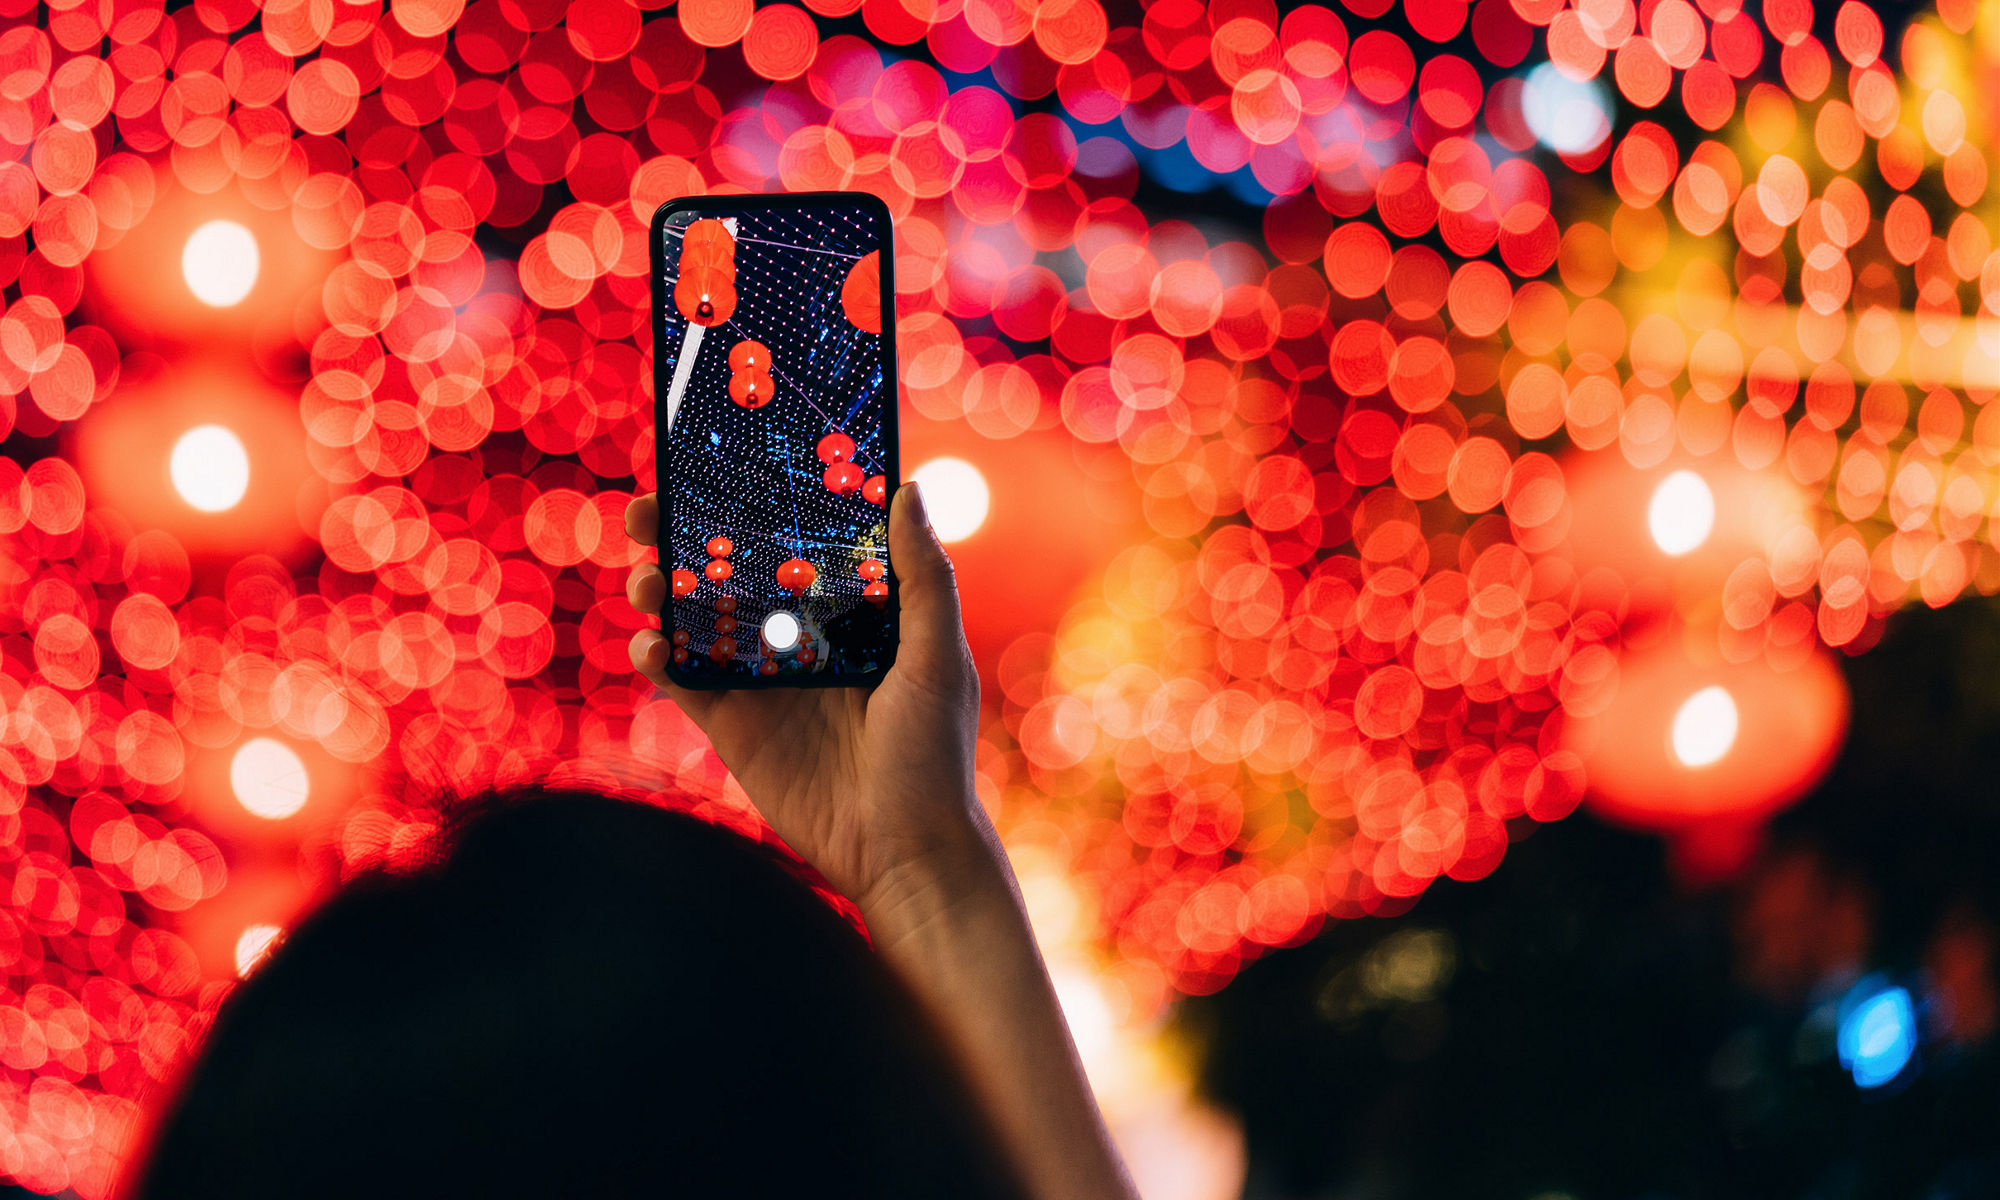 A view from above of someone holding their cell phone out over a sea of blurred bright lights in red and orange hues